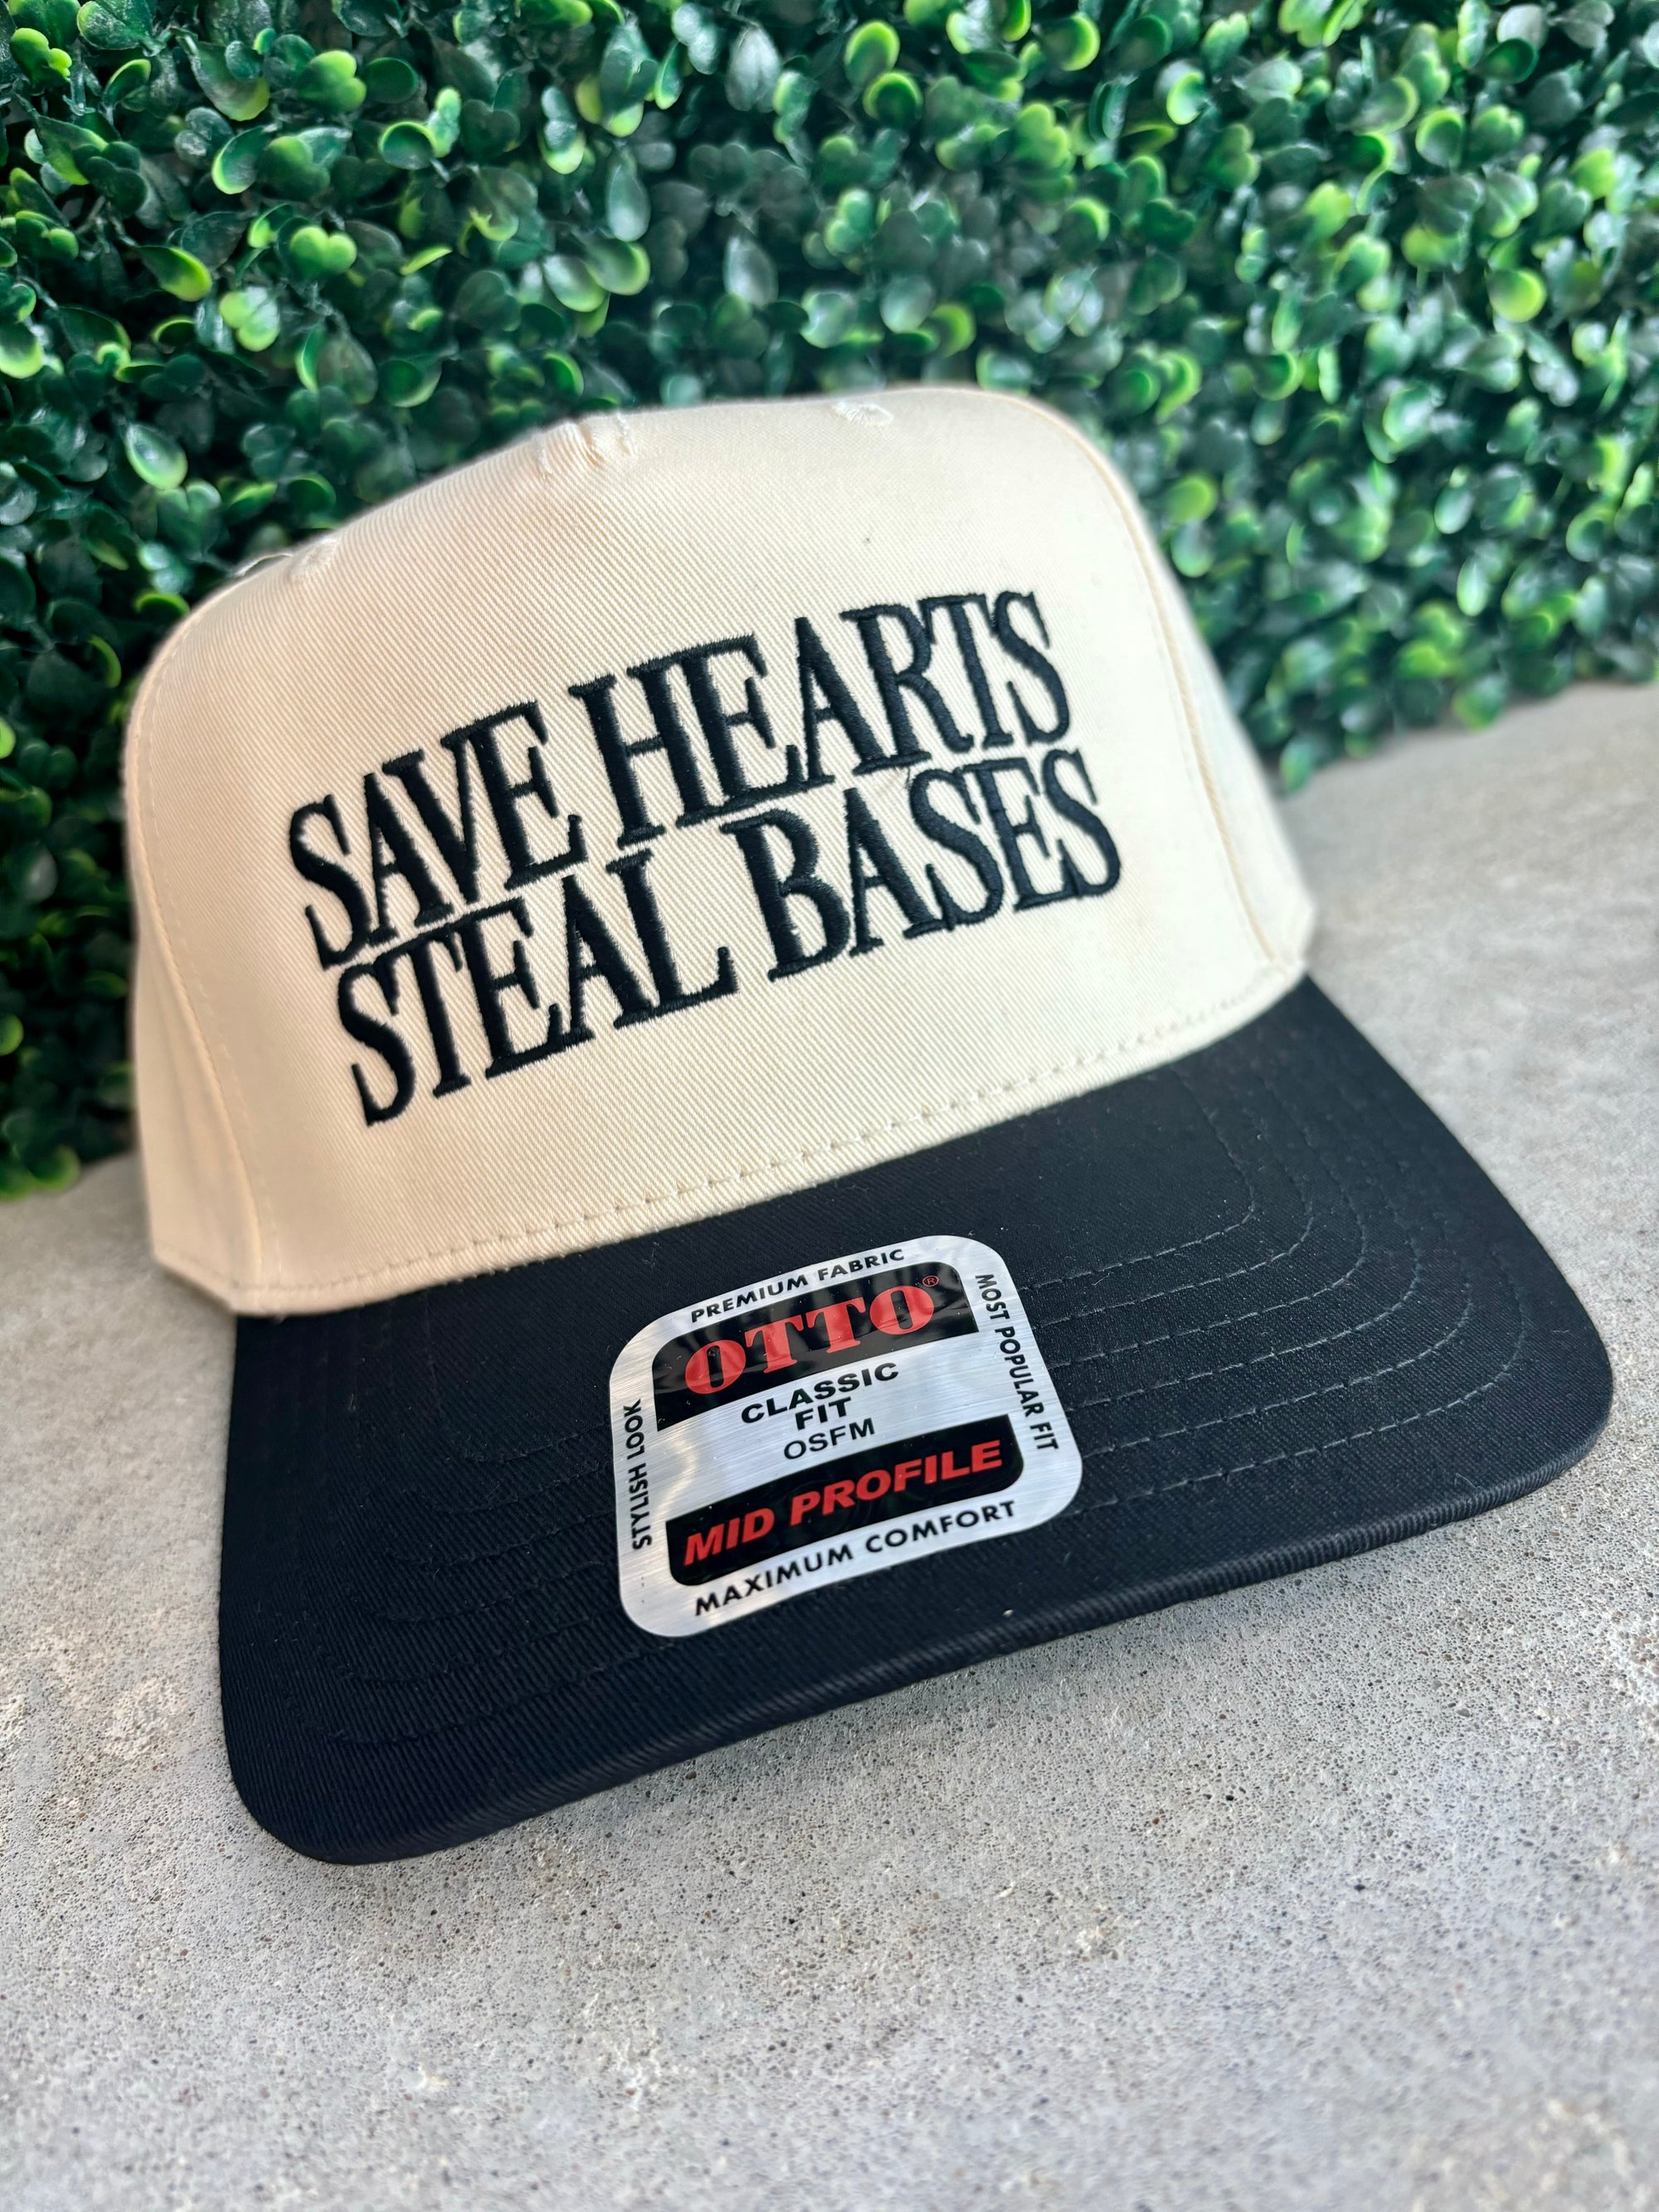 Save Hearts Steal Bases